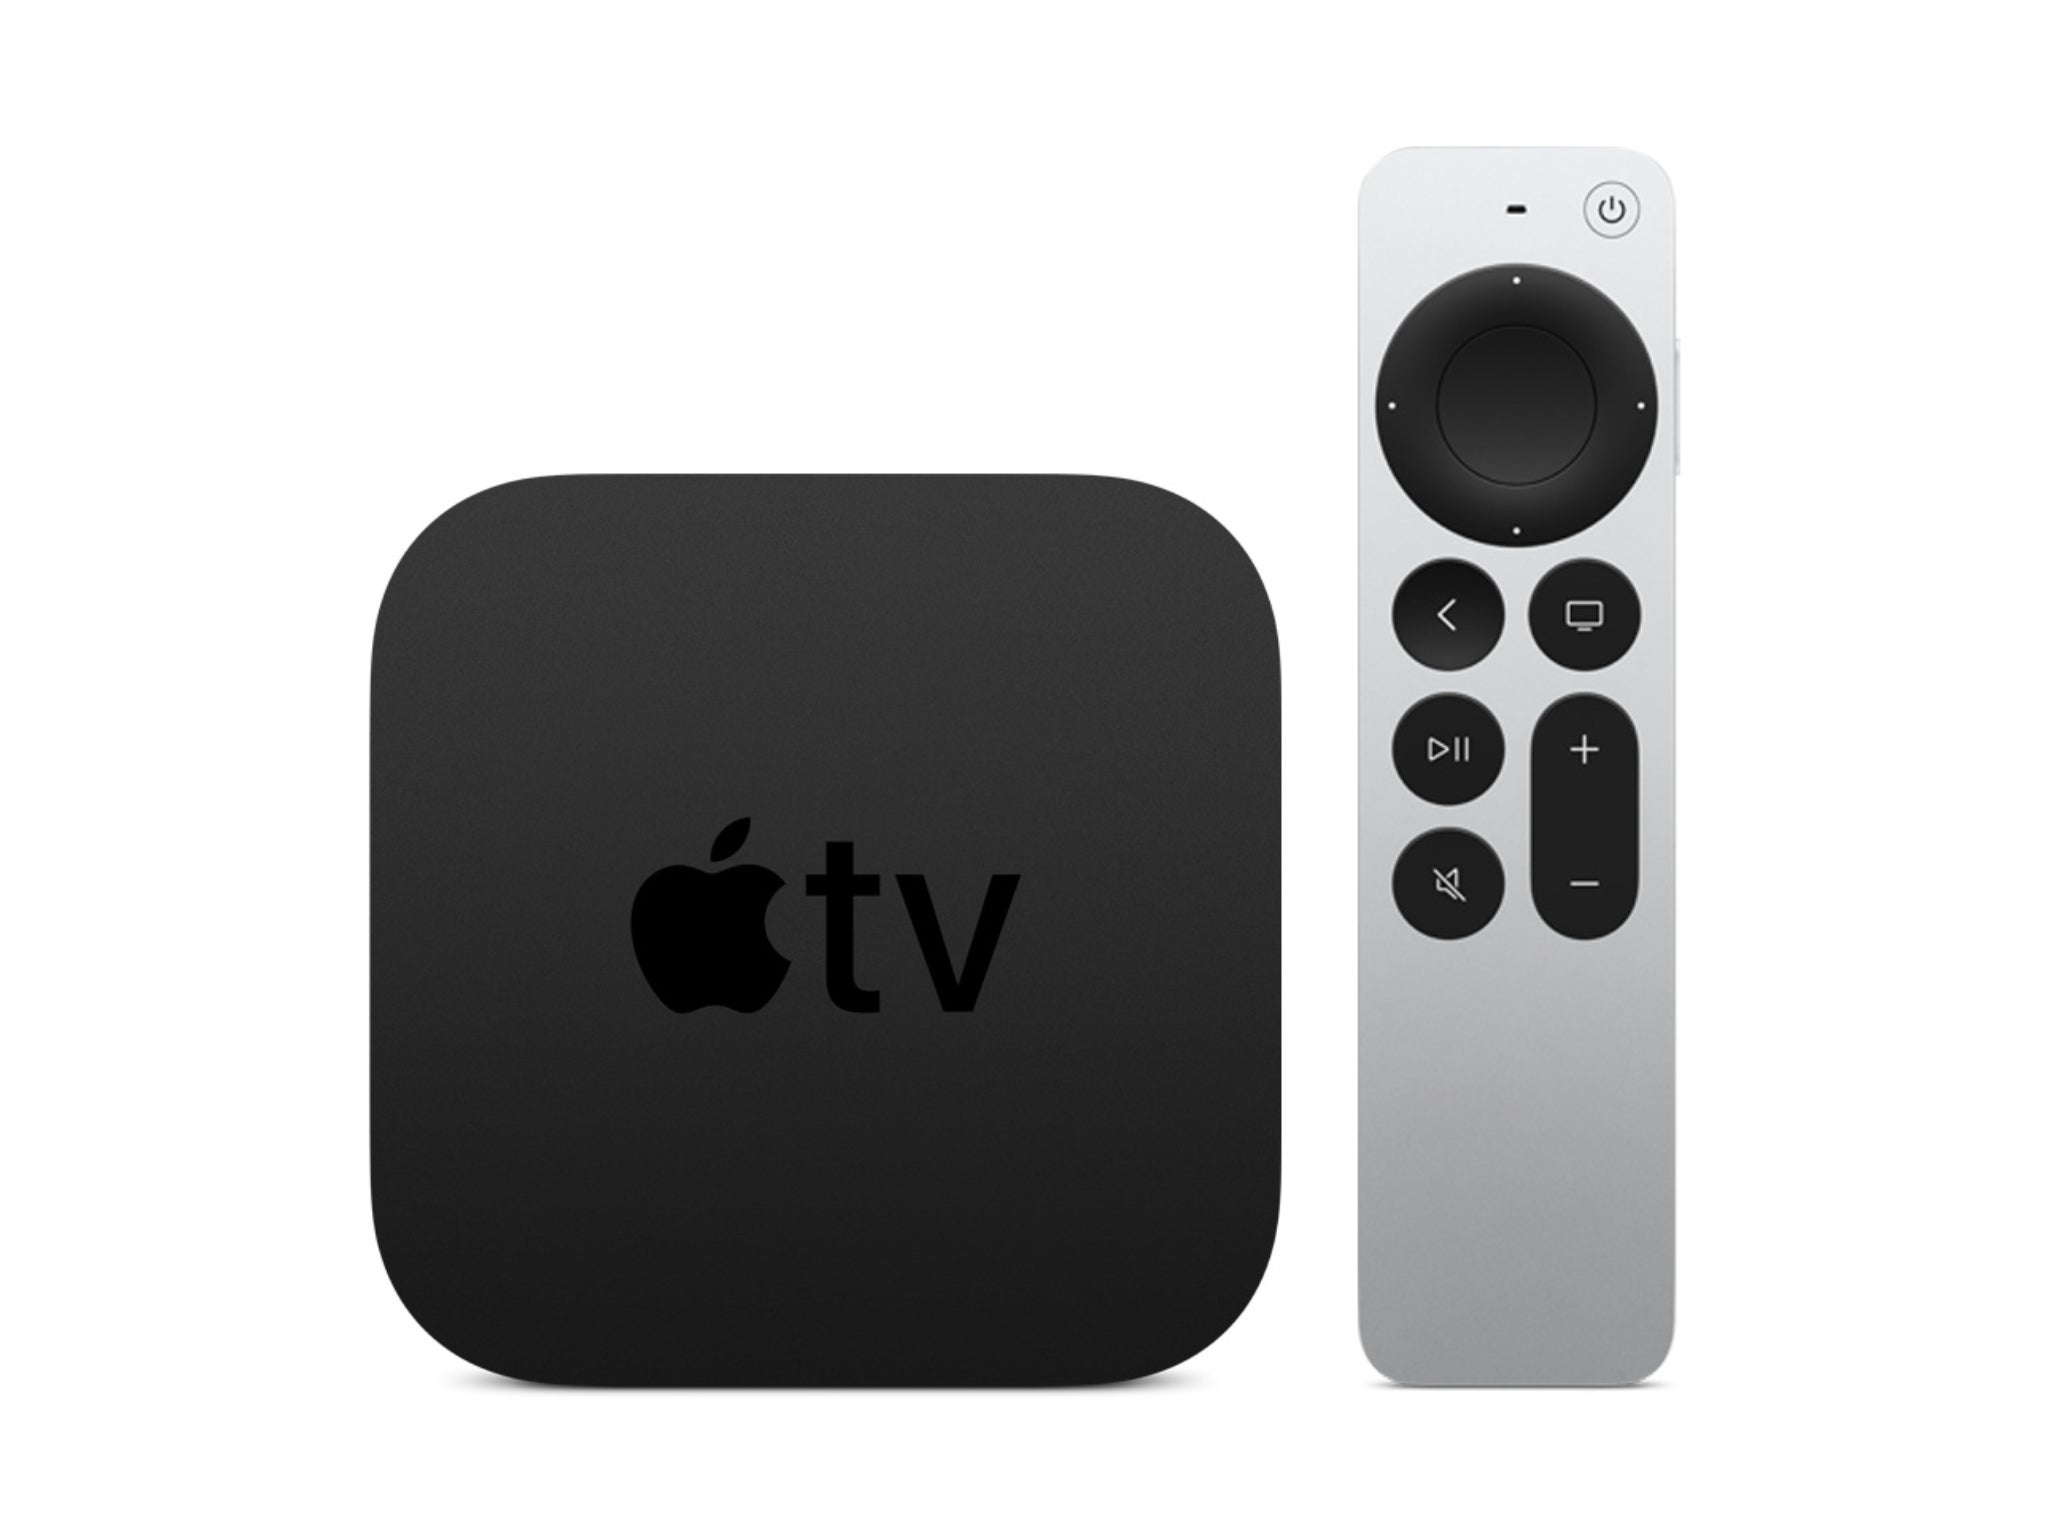 Apple TV 4K device and remote control